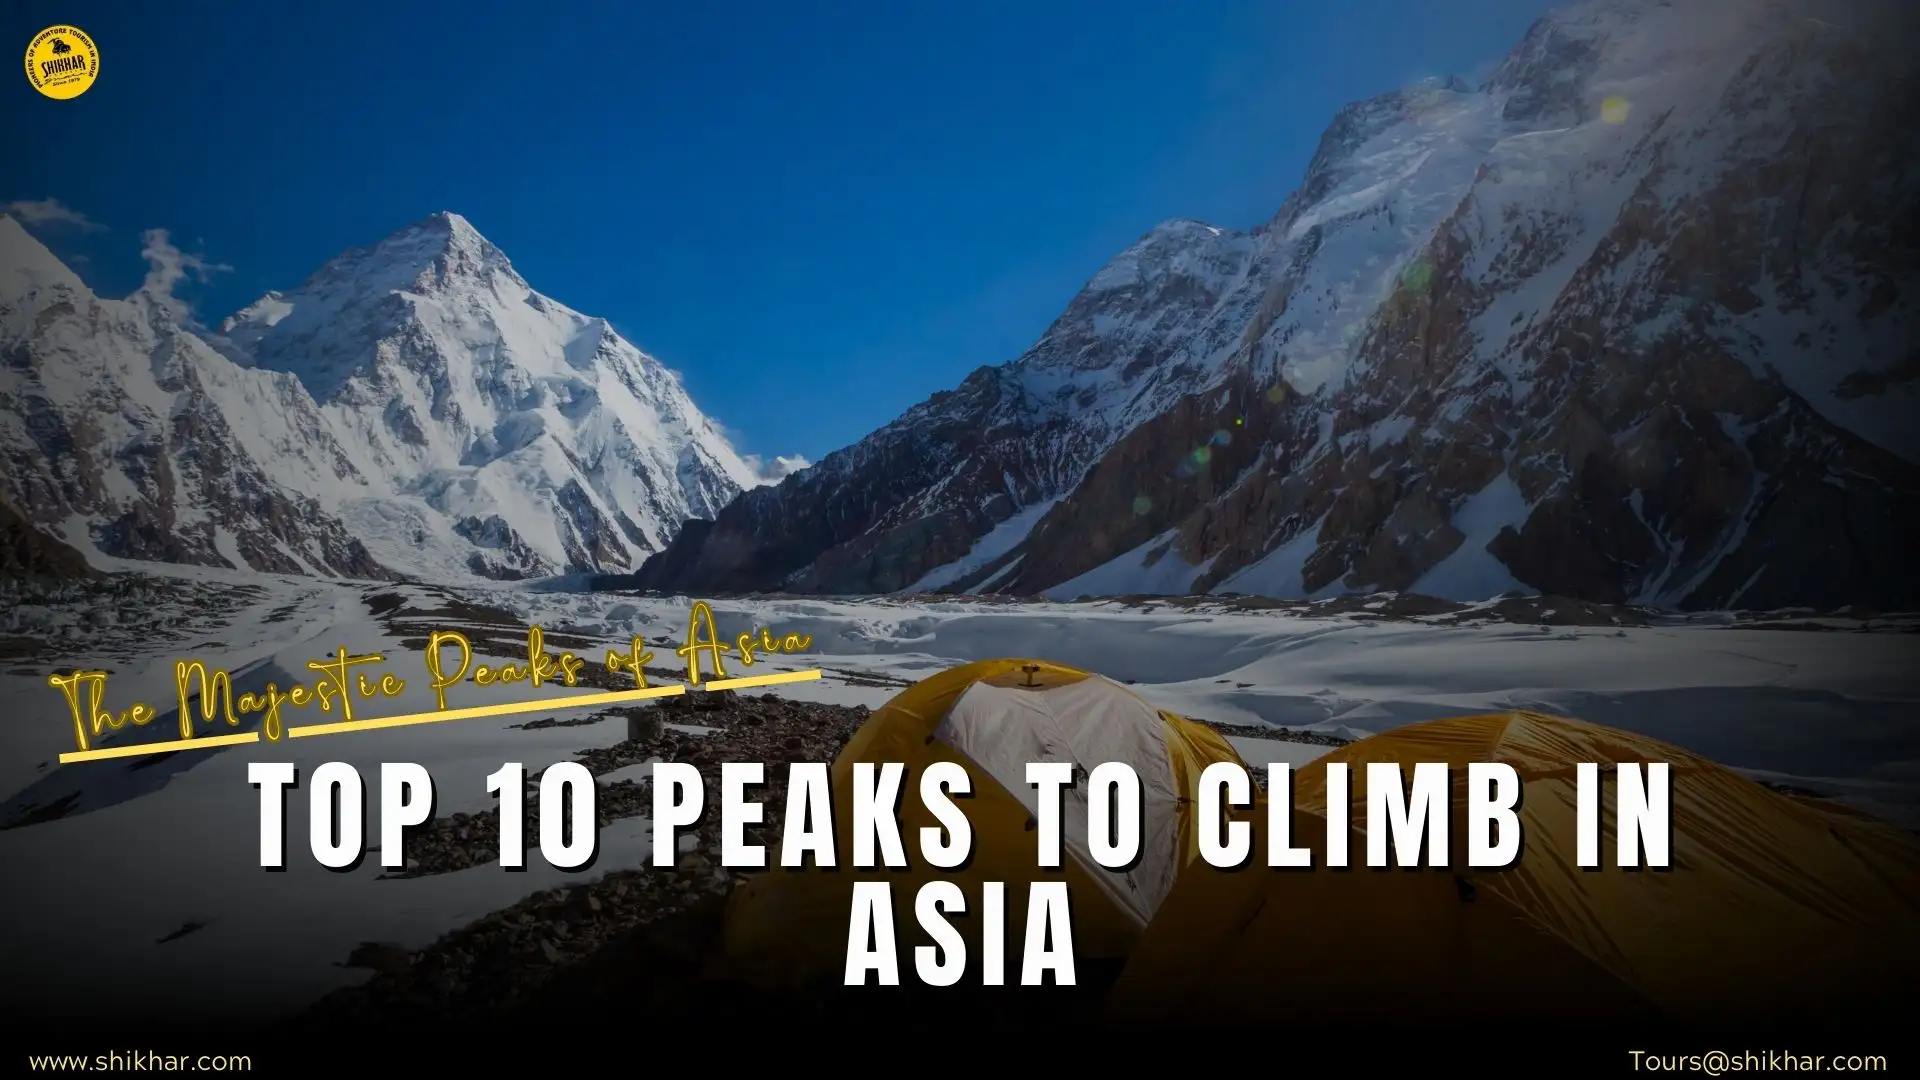 Top 10 Peaks to Climb in Asia